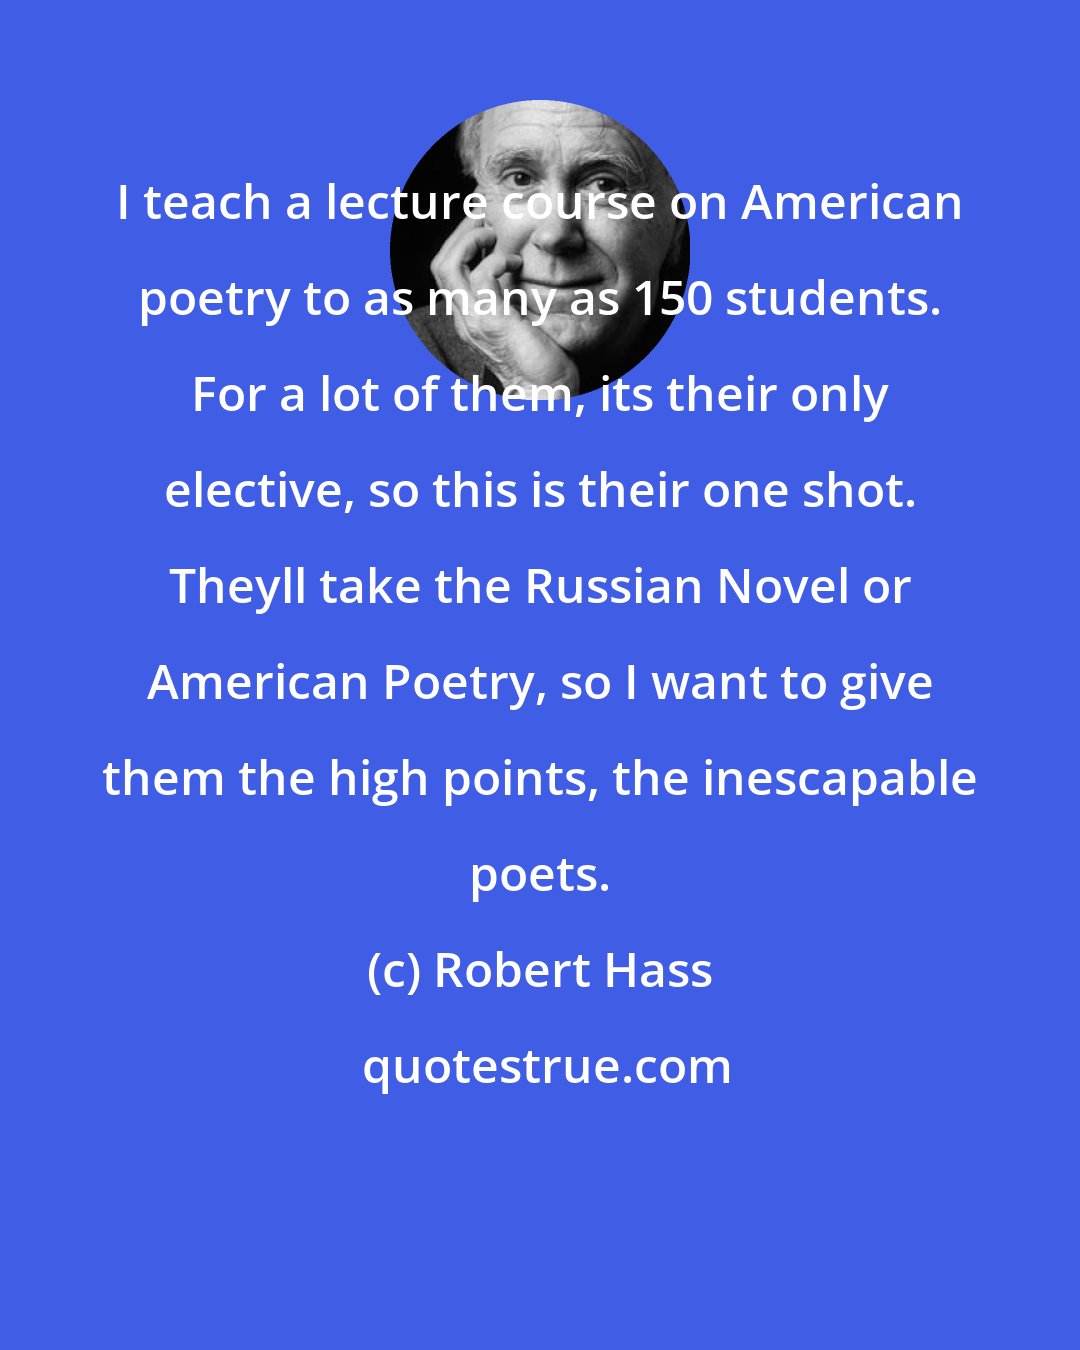 Robert Hass: I teach a lecture course on American poetry to as many as 150 students. For a lot of them, its their only elective, so this is their one shot. Theyll take the Russian Novel or American Poetry, so I want to give them the high points, the inescapable poets.